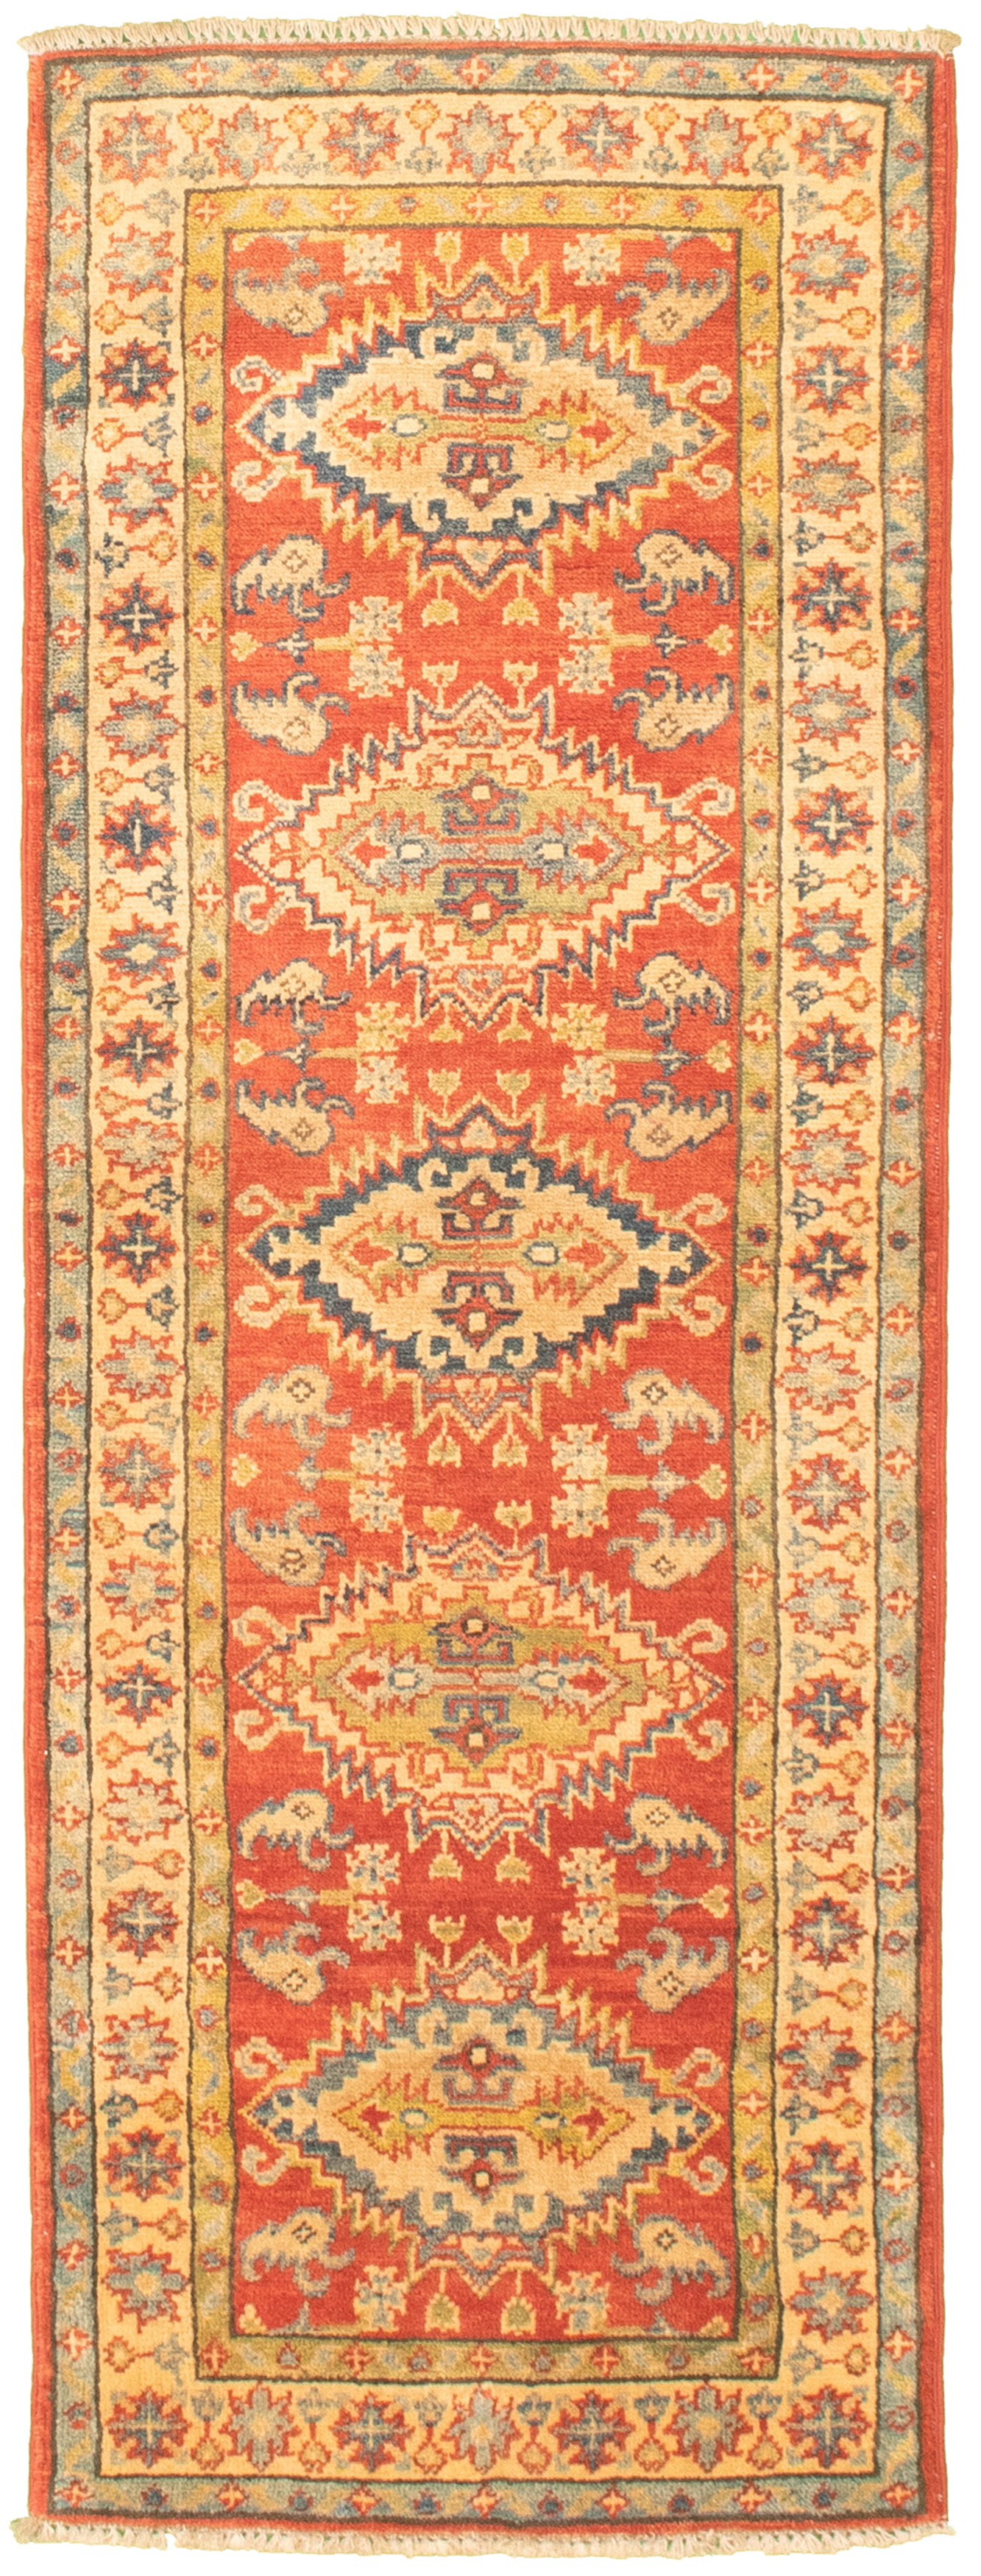 Hand-knotted Finest Gazni Red Wool Rug 2'1" x 5'10"  Size: 2'1" x 5'10"  